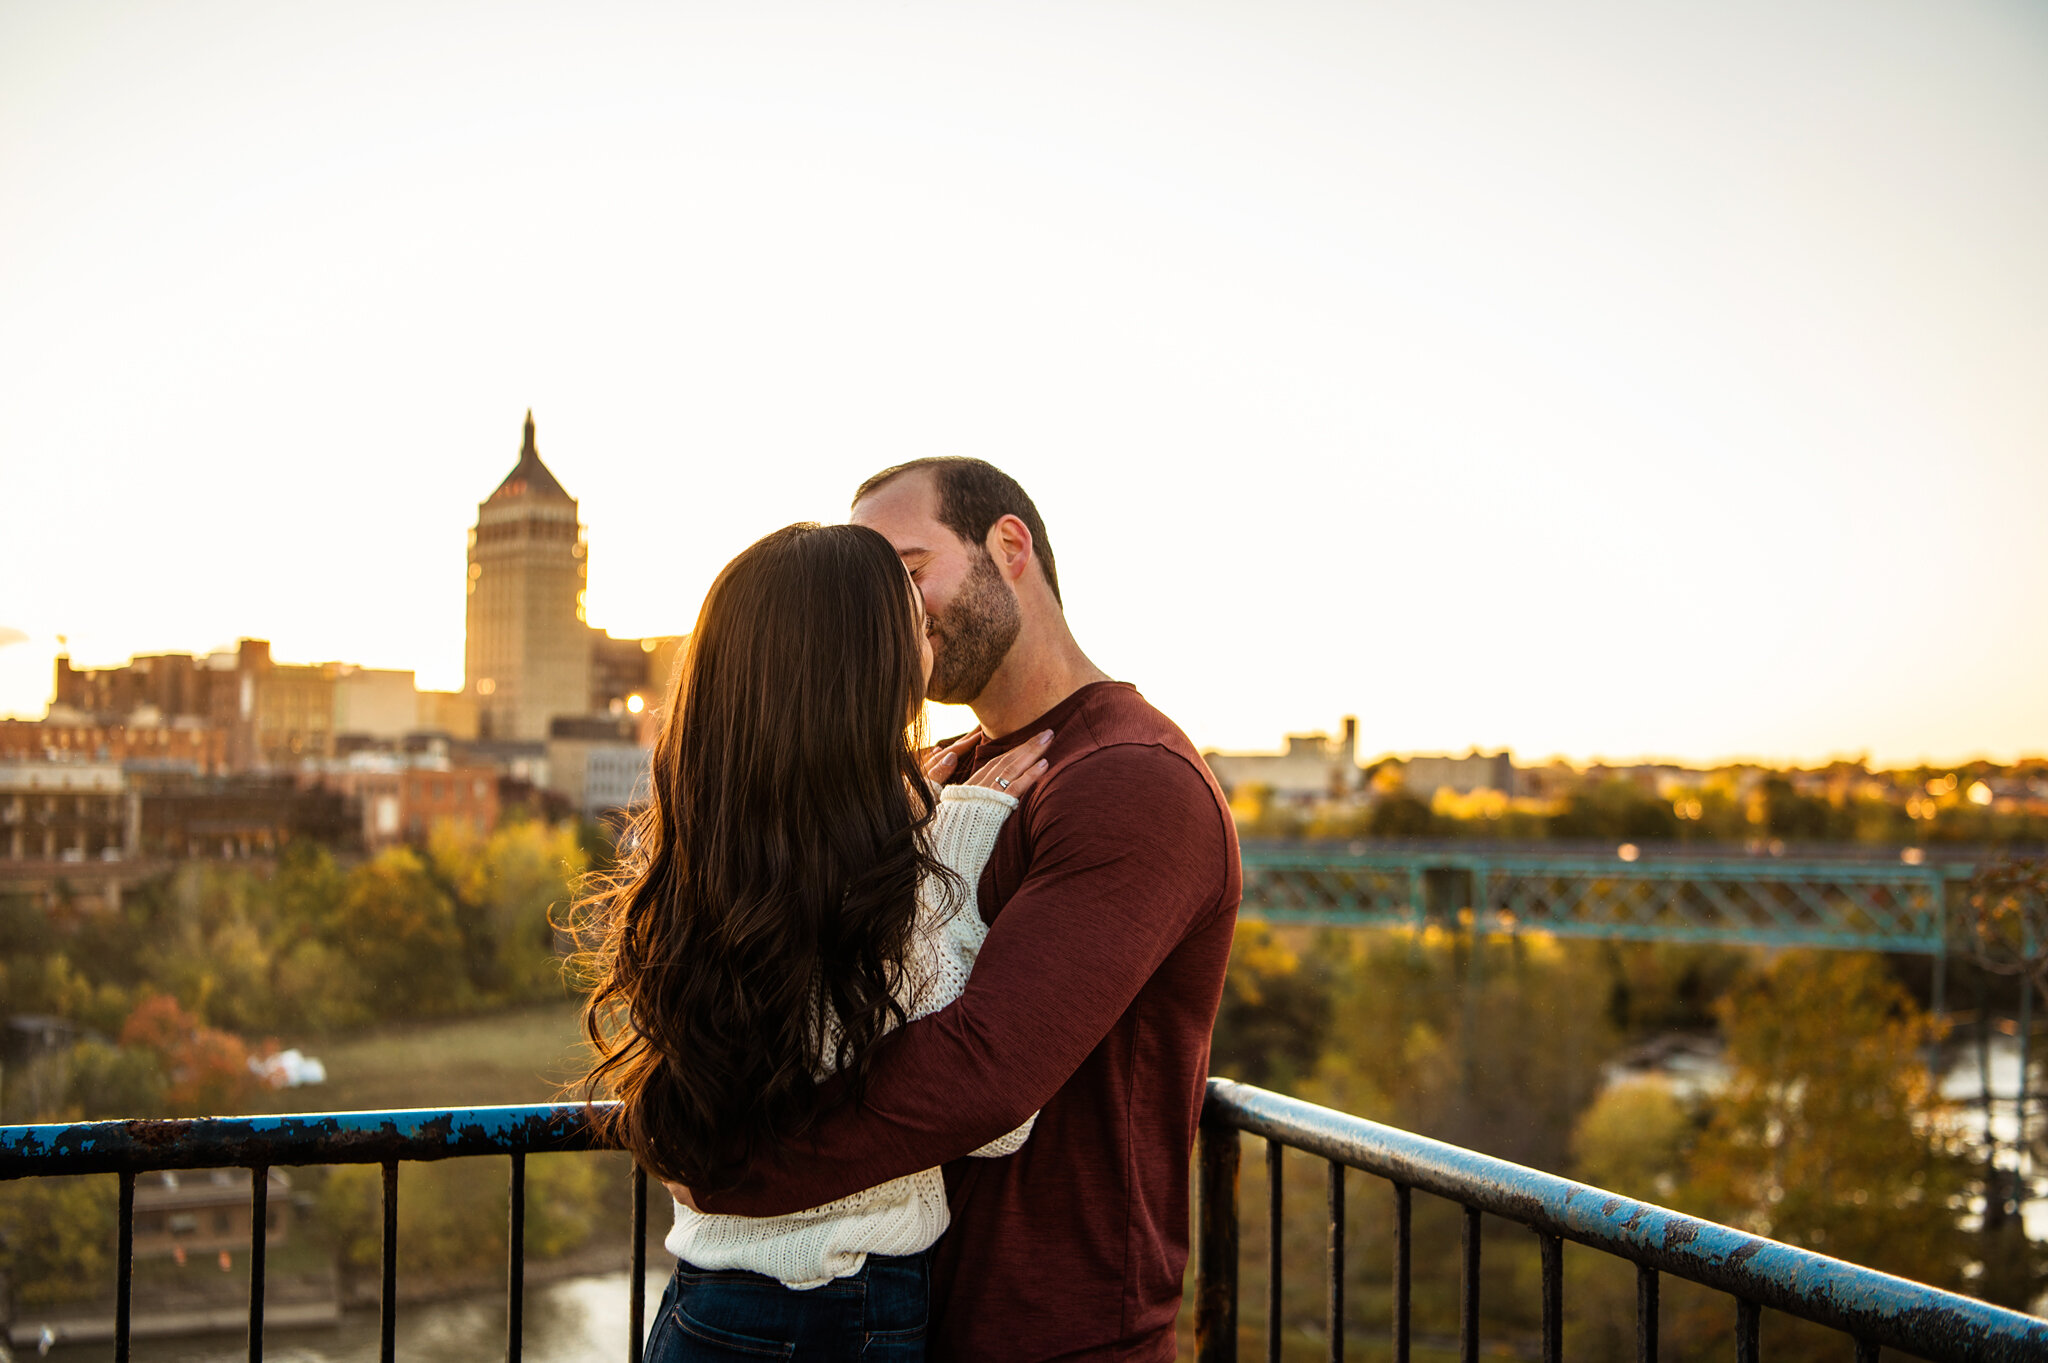 Genesee_Valley_Club_High_Falls_Rochester_Engagement_Session_JILL_STUDIO_Rochester_NY_Photographer_1576.jpg